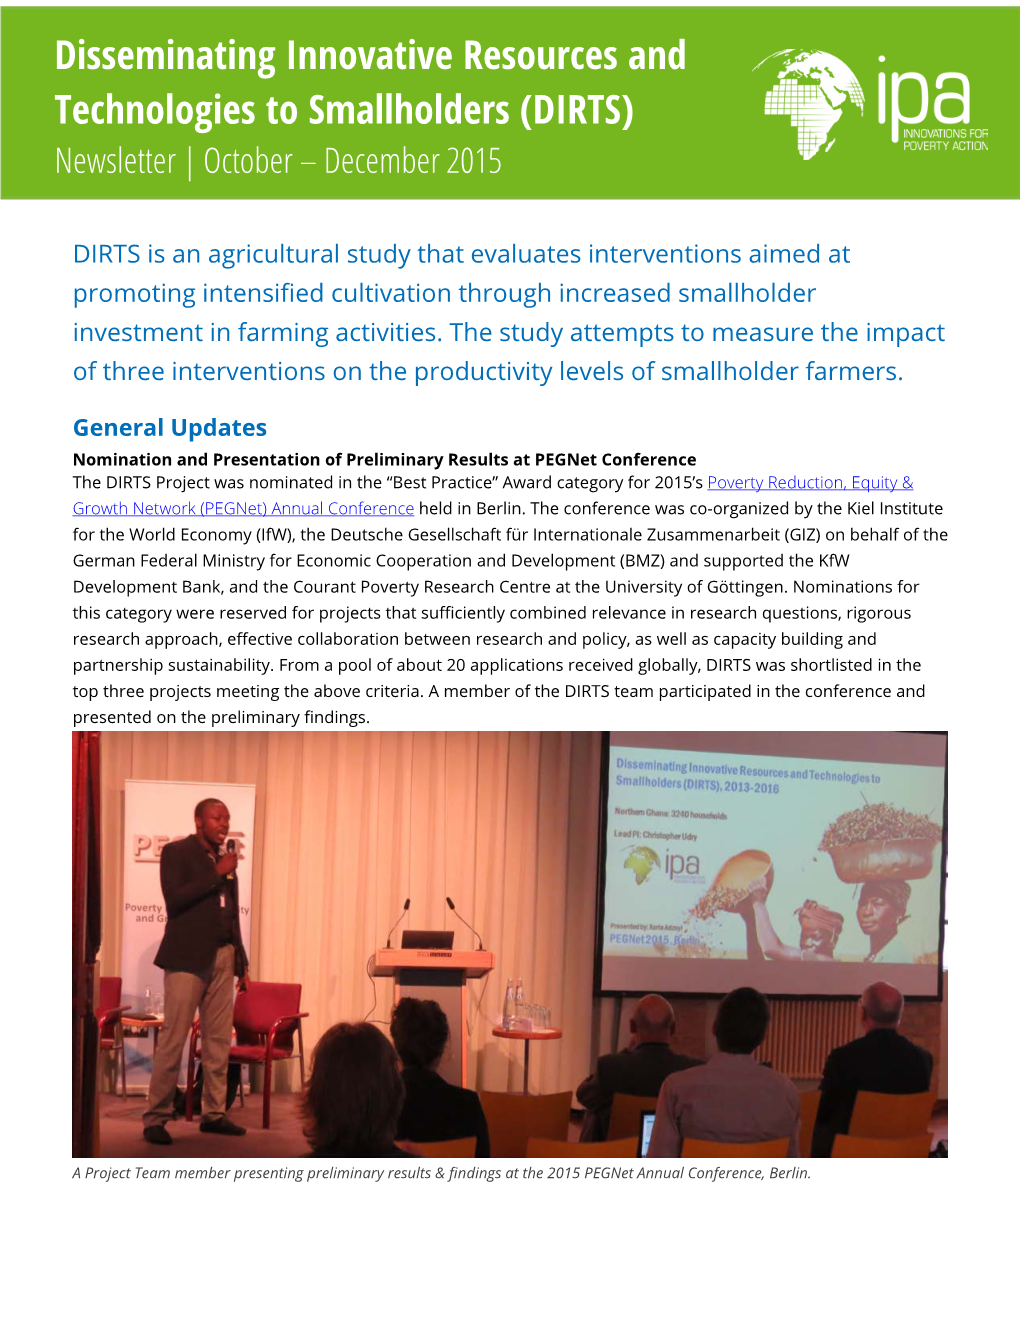 Disseminating Innovative Resources and Technologies to Smallholders (DIRTS) Newsletter | October – December 2015